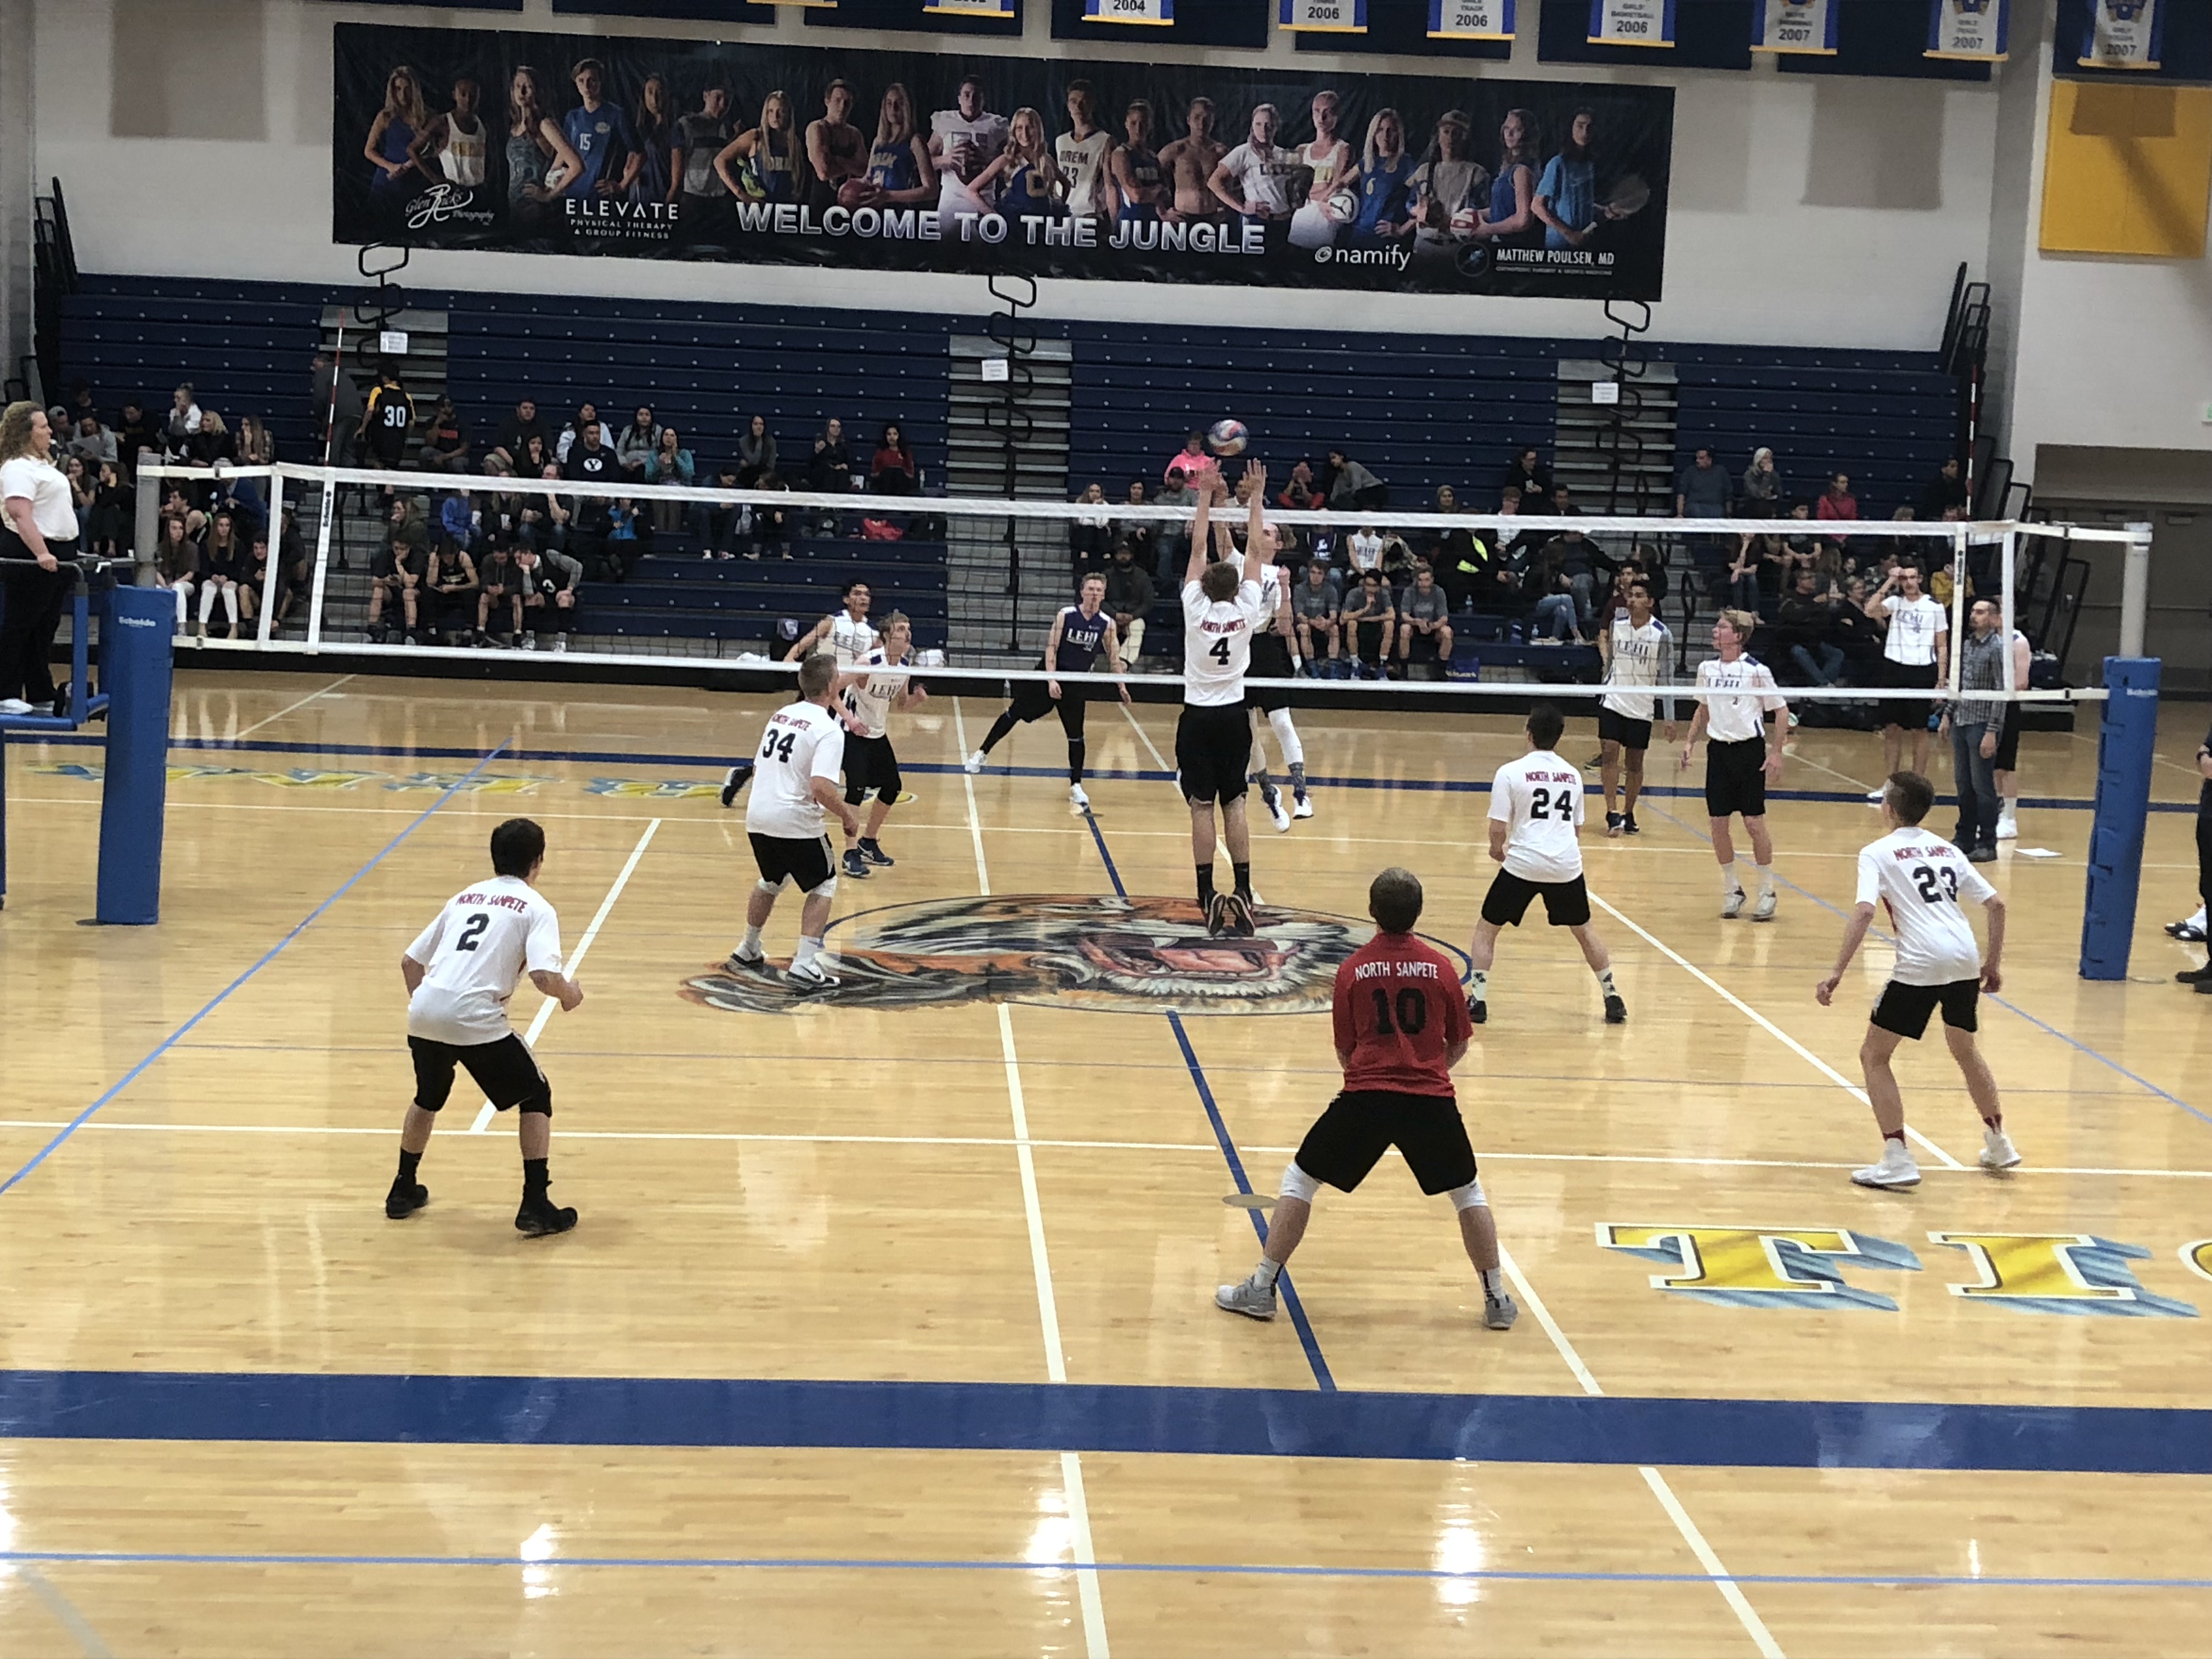 New boys’ volleyball team finds great success